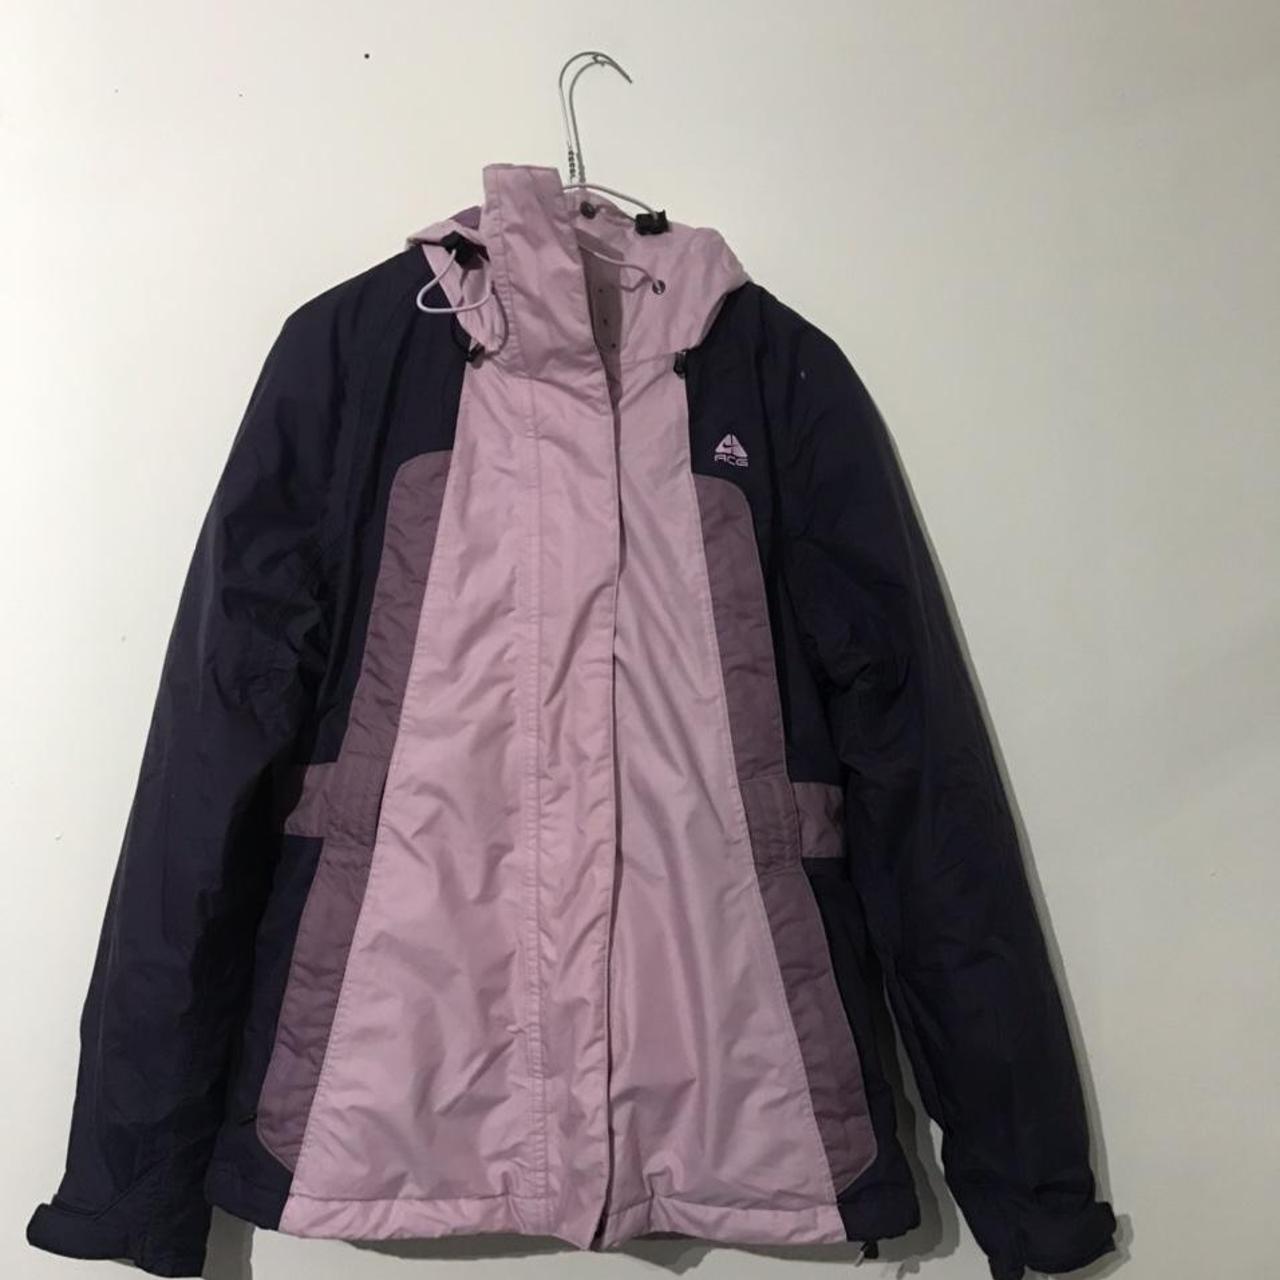 Product Image 1 - Woman's Nike ACG 3 layer